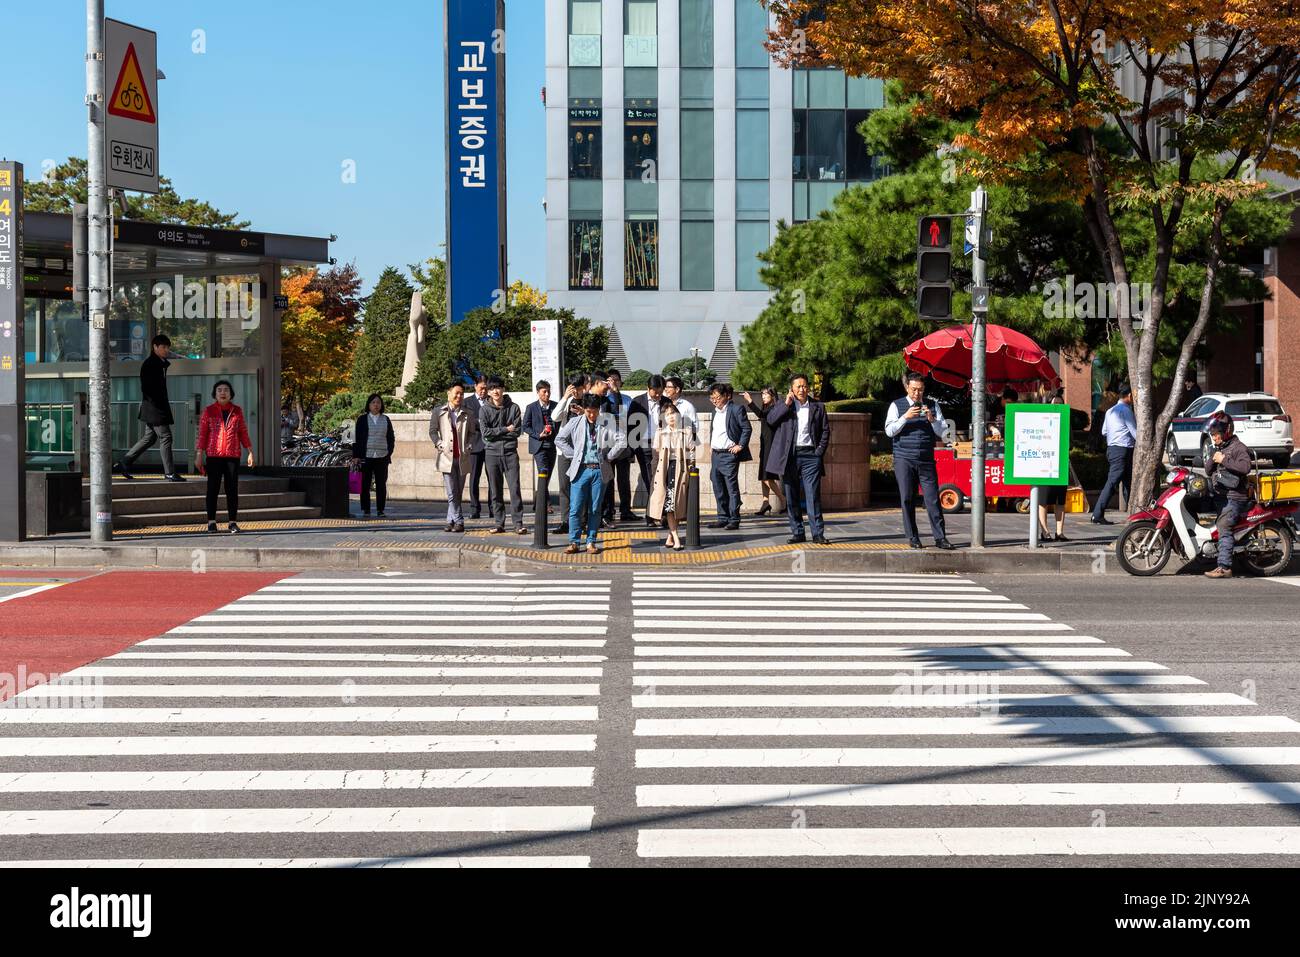 Seoul, South Korea - November 04, 2019: Street scene at Yeouido district. It is a Seoul's main finance and investment banking district. Stock Photo